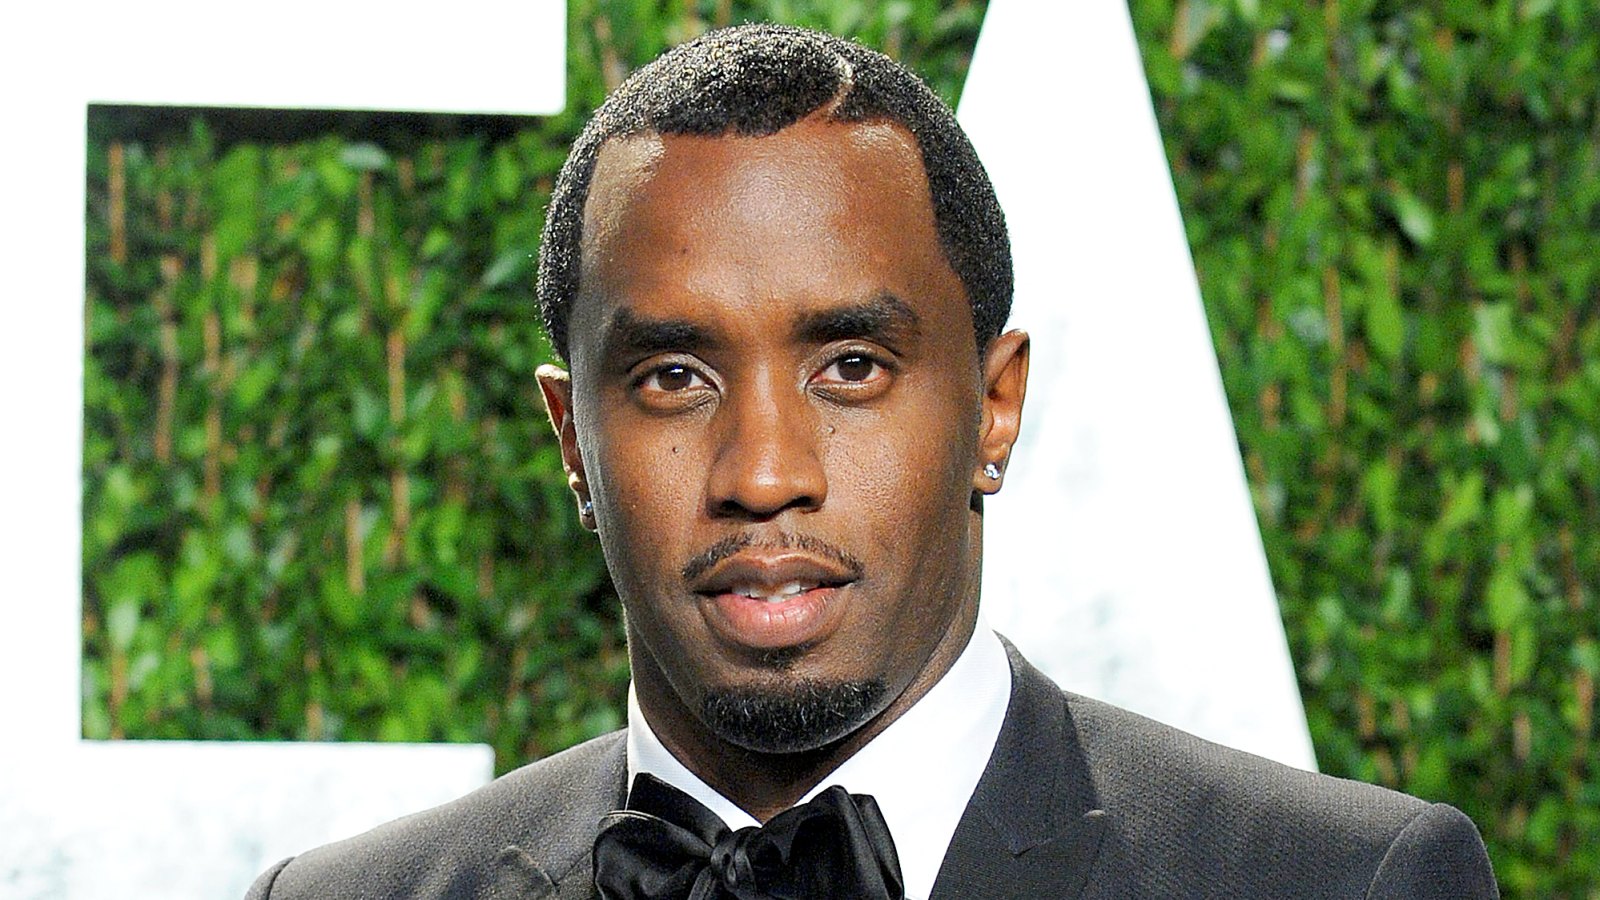 Sean Diddy Combs